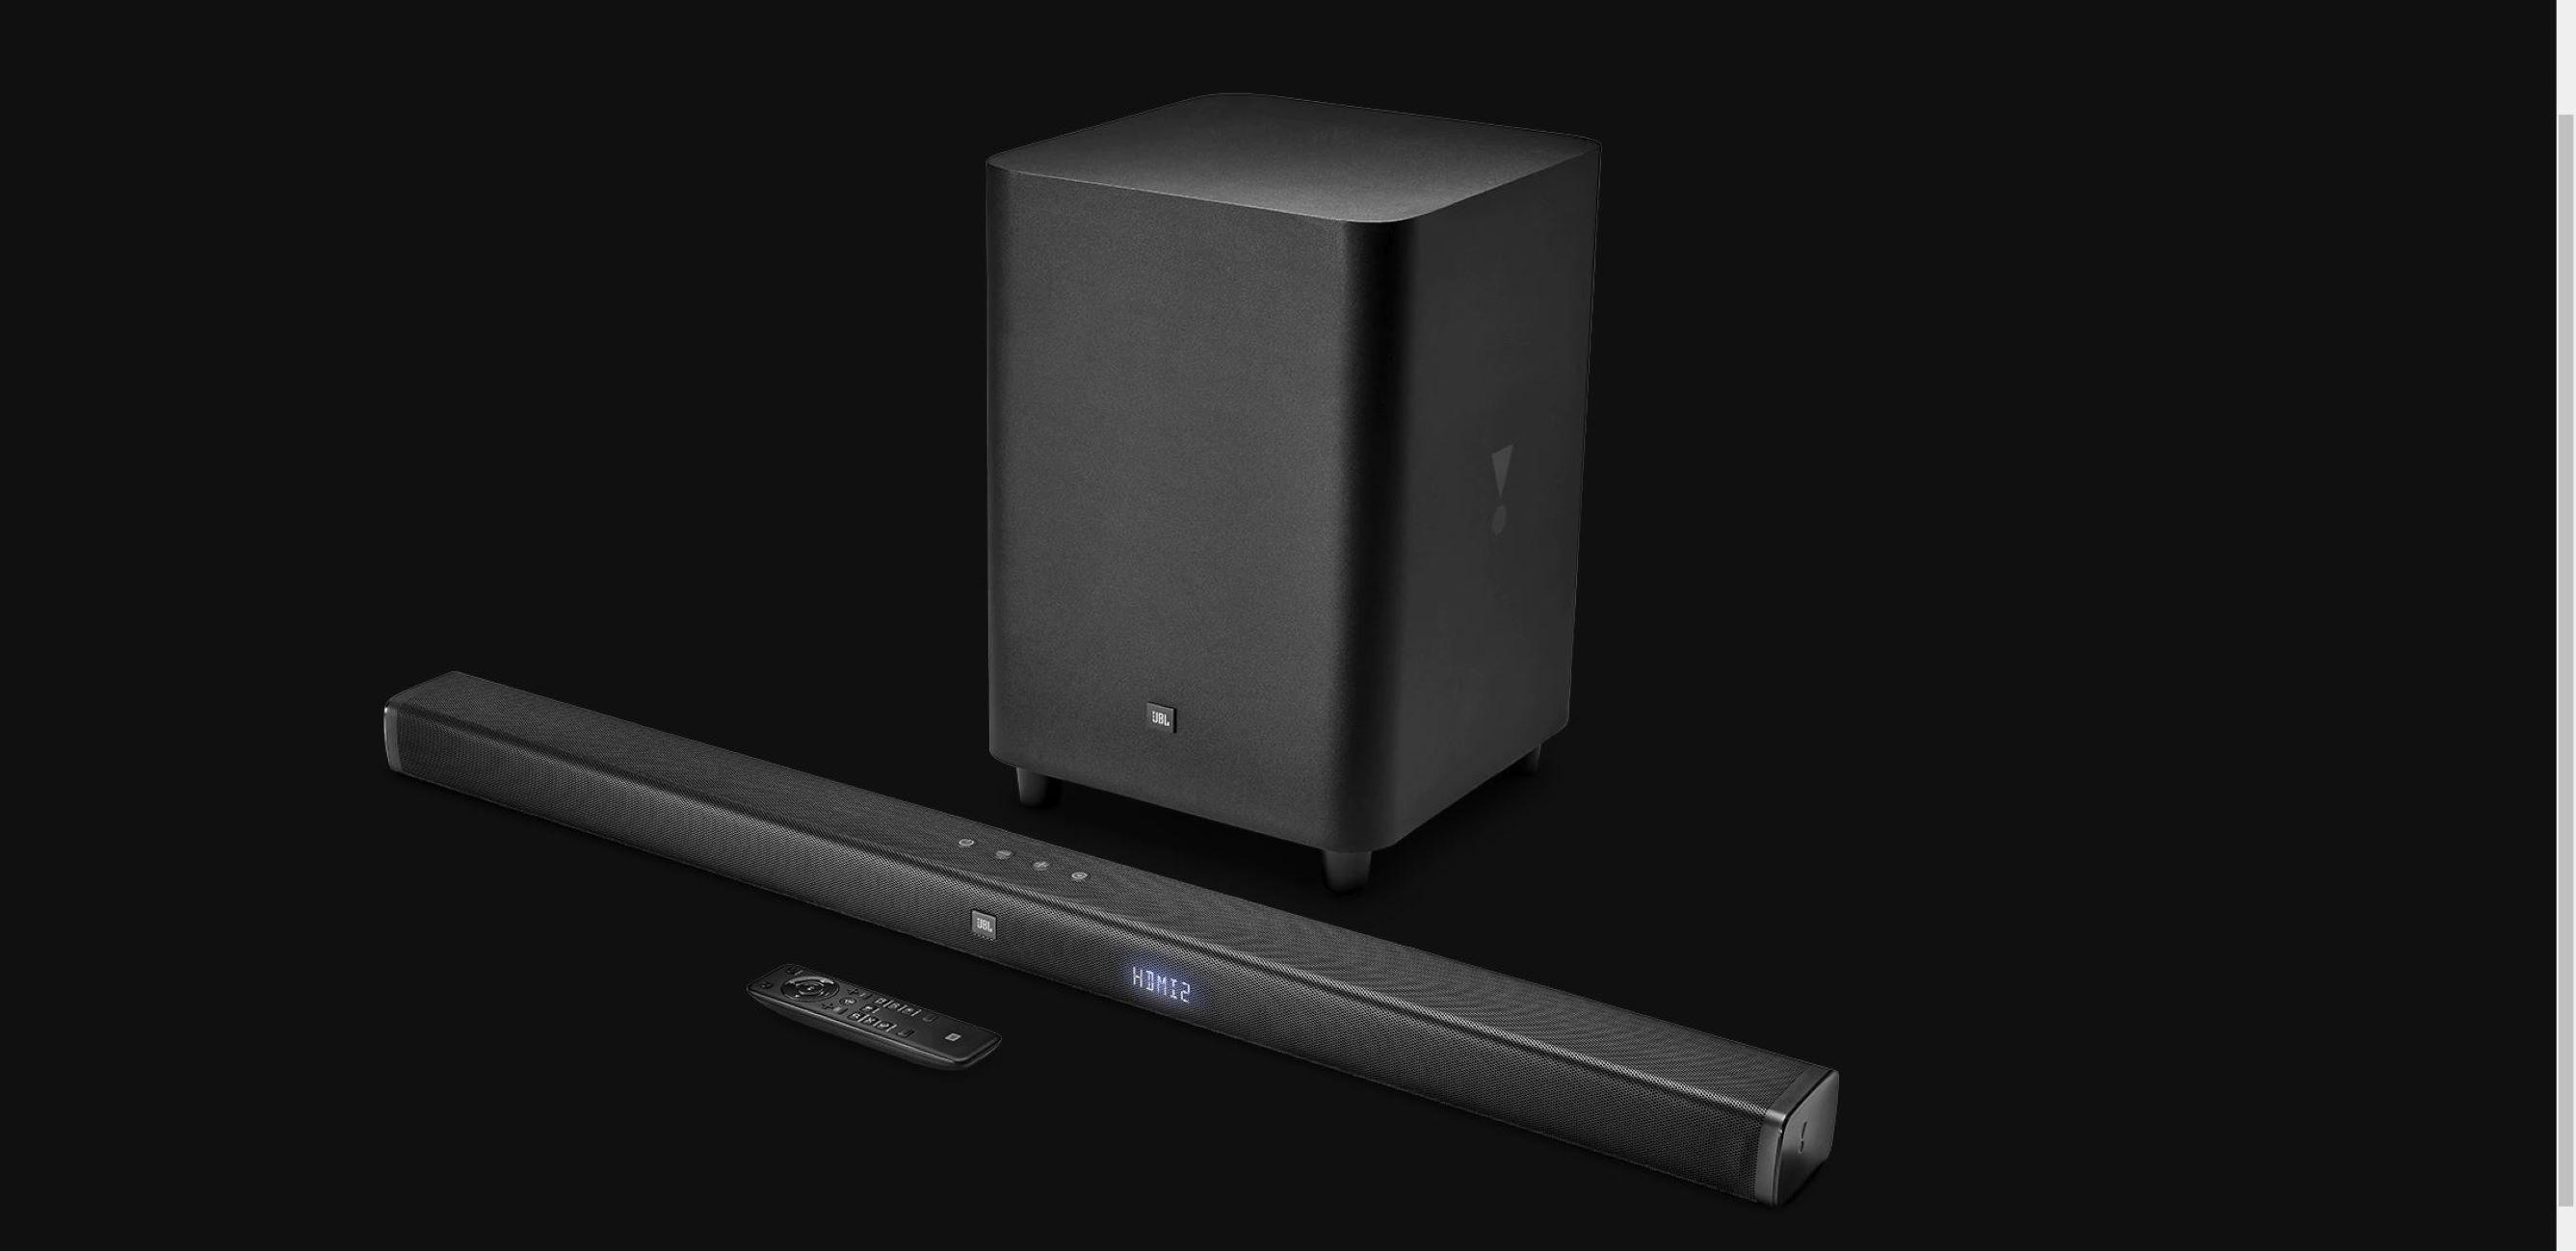 How To Pair JBL Subwoofer To Soundbar 3.1 Without Remote